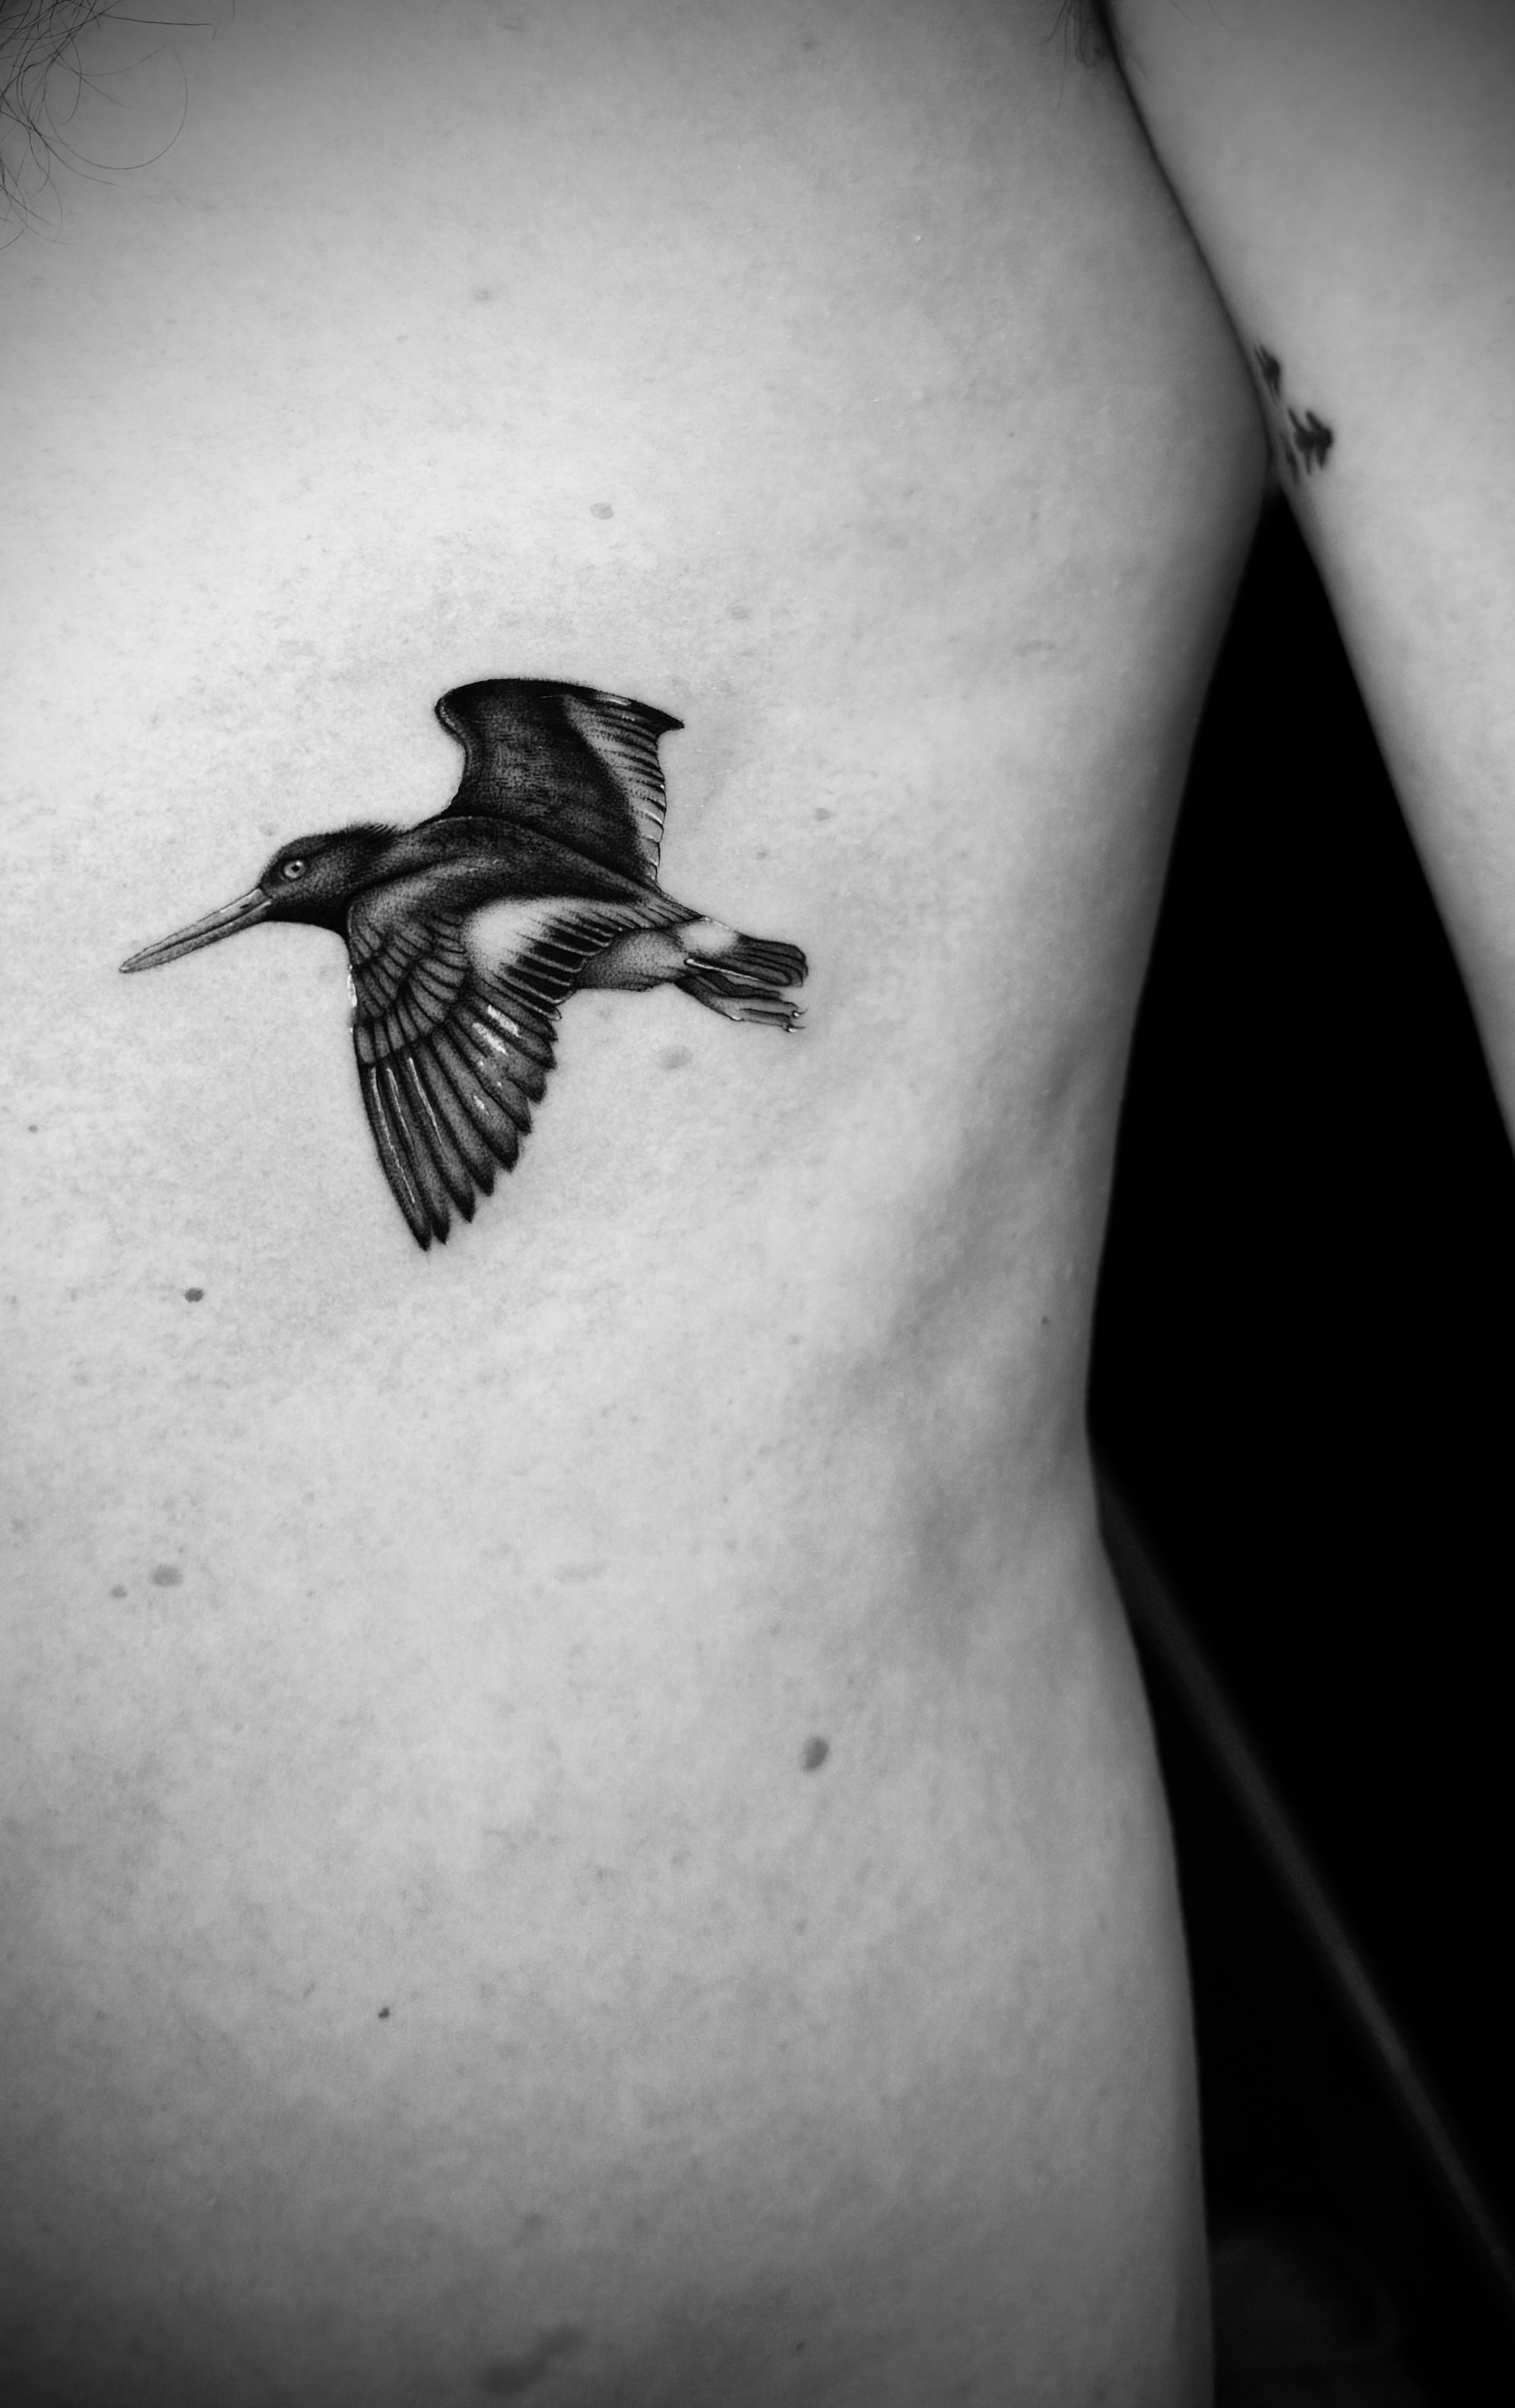 Seagull Tattoo Design Images (Seagull Ink Design Ideas) | Seagull tattoo,  Tattoo designs, Tattoos